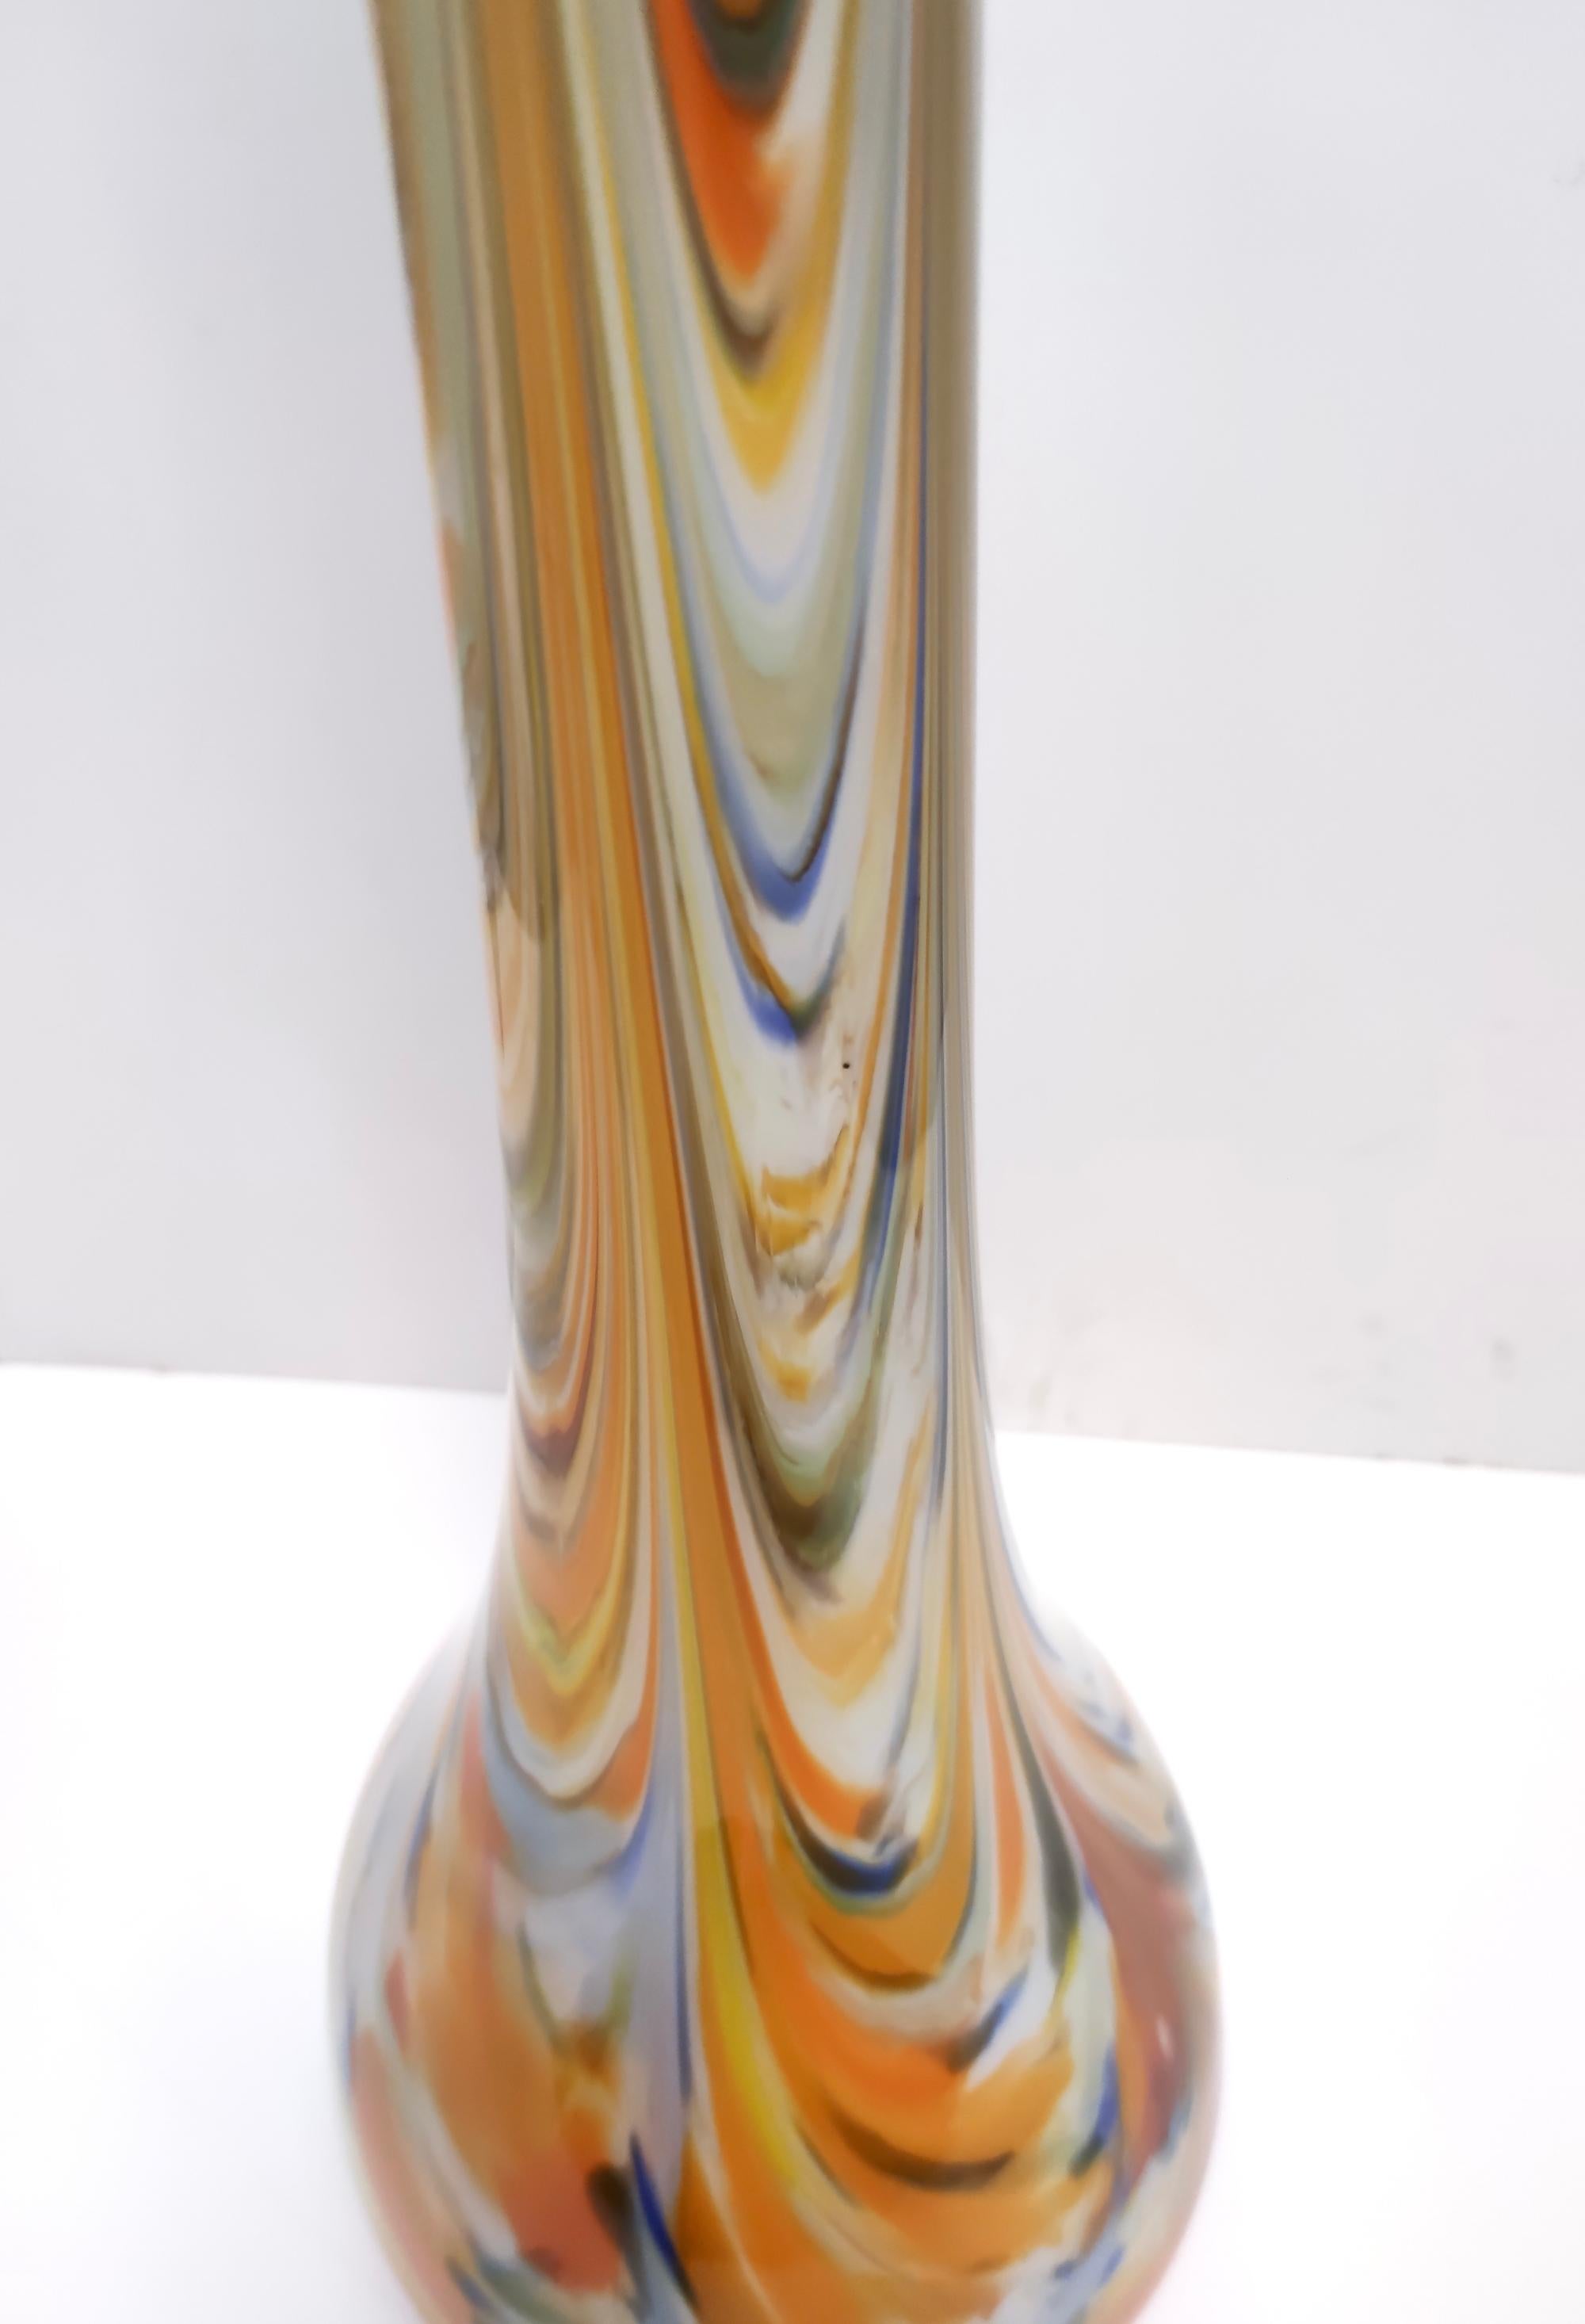 Large and Rare Vintage Orange Fenicio Glass Vase attr. to Fratelli Toso, Italy For Sale 4